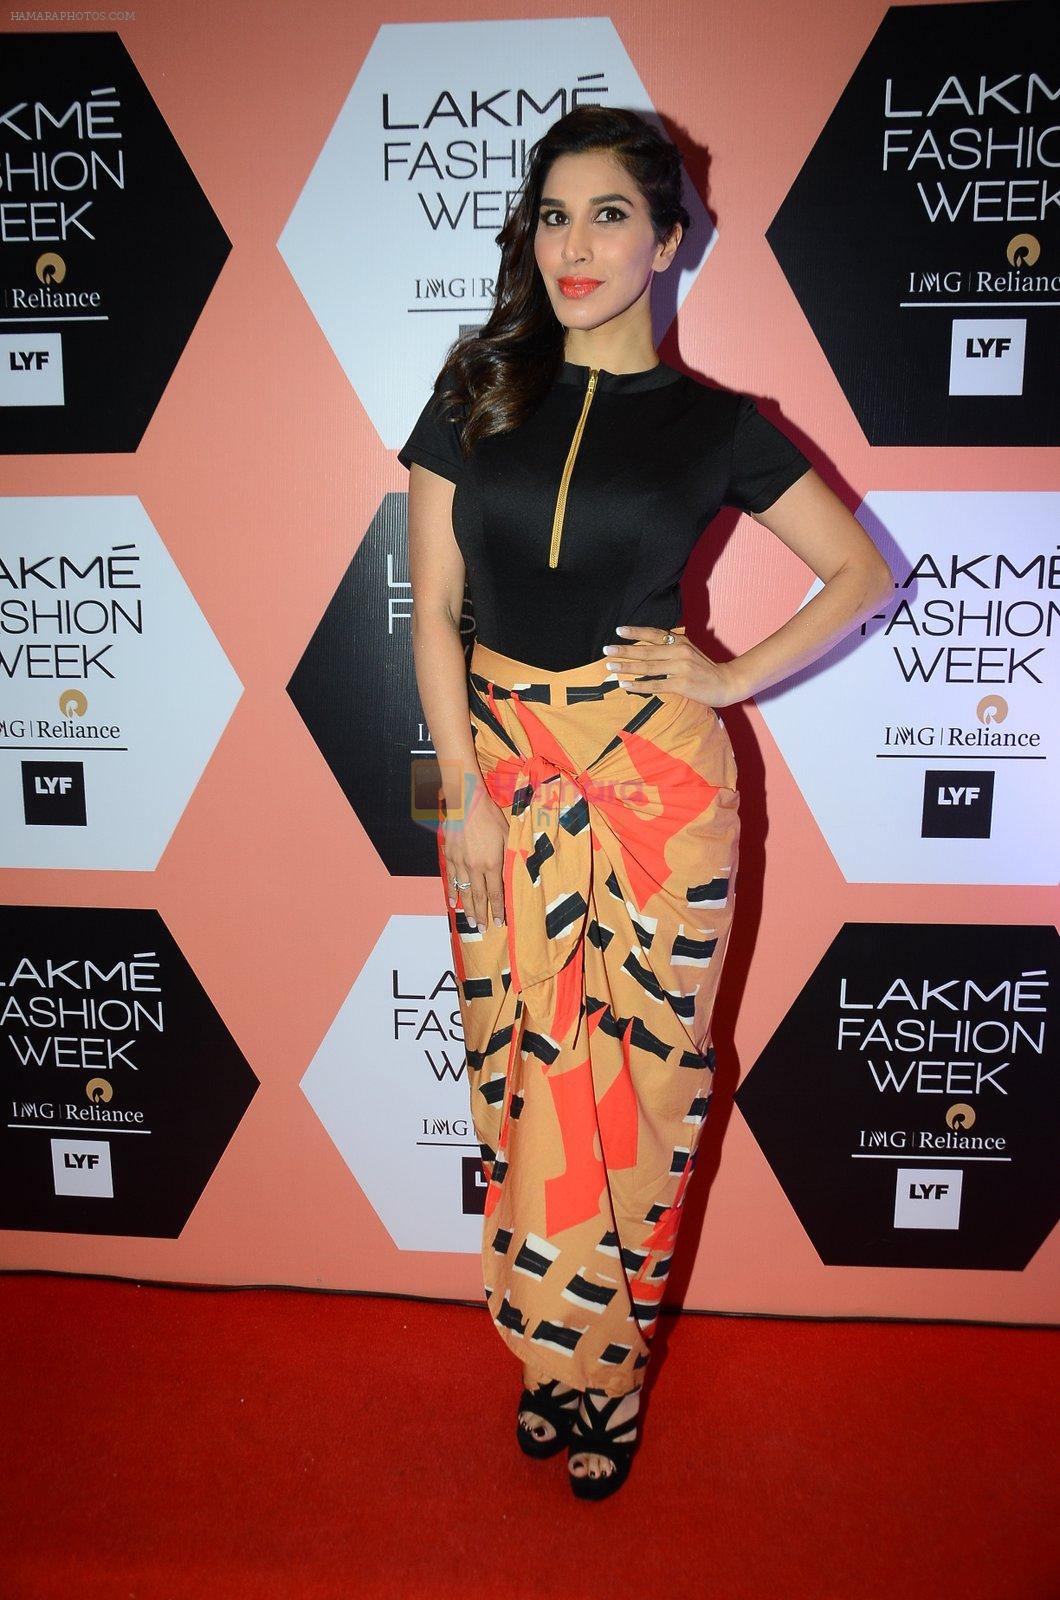 Sophie Chaudhary on Day 4 at Lakme Fashion Week 2016 on 2nd April 2016